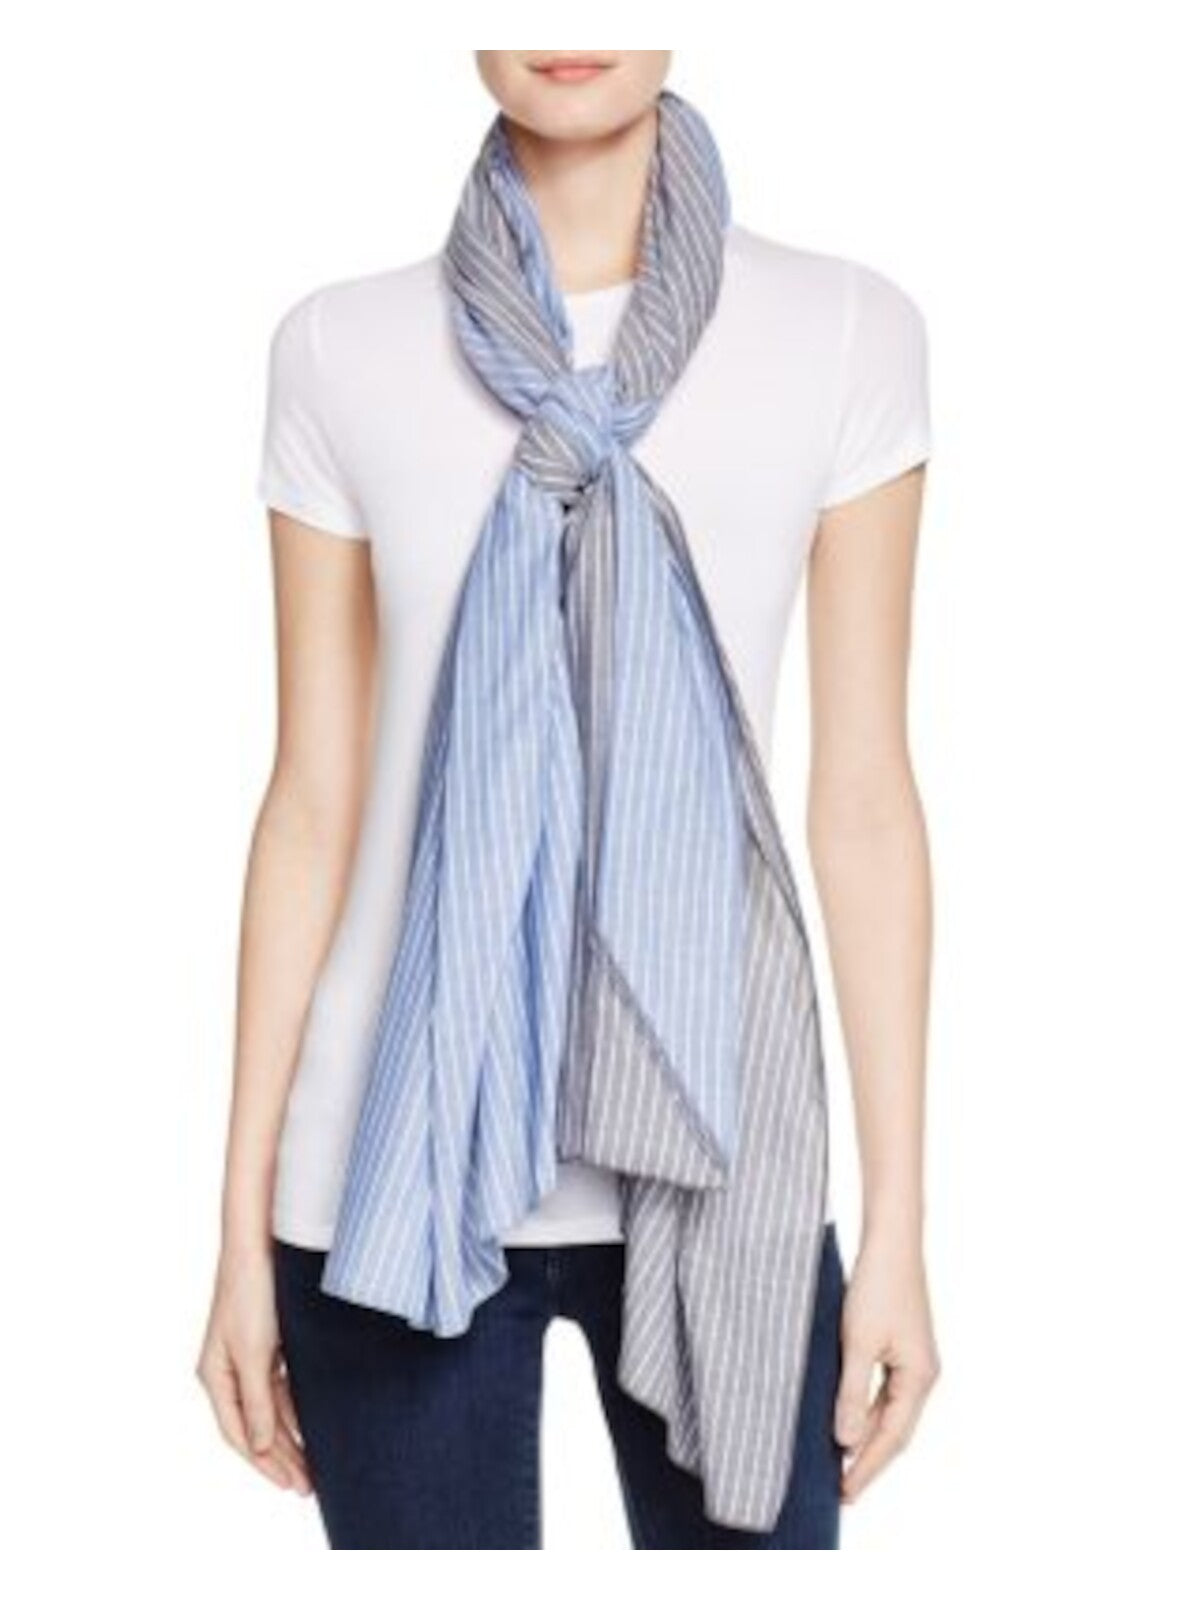 DONNI CHARM Womens Blue Cotton Striped Lightweight Scarf